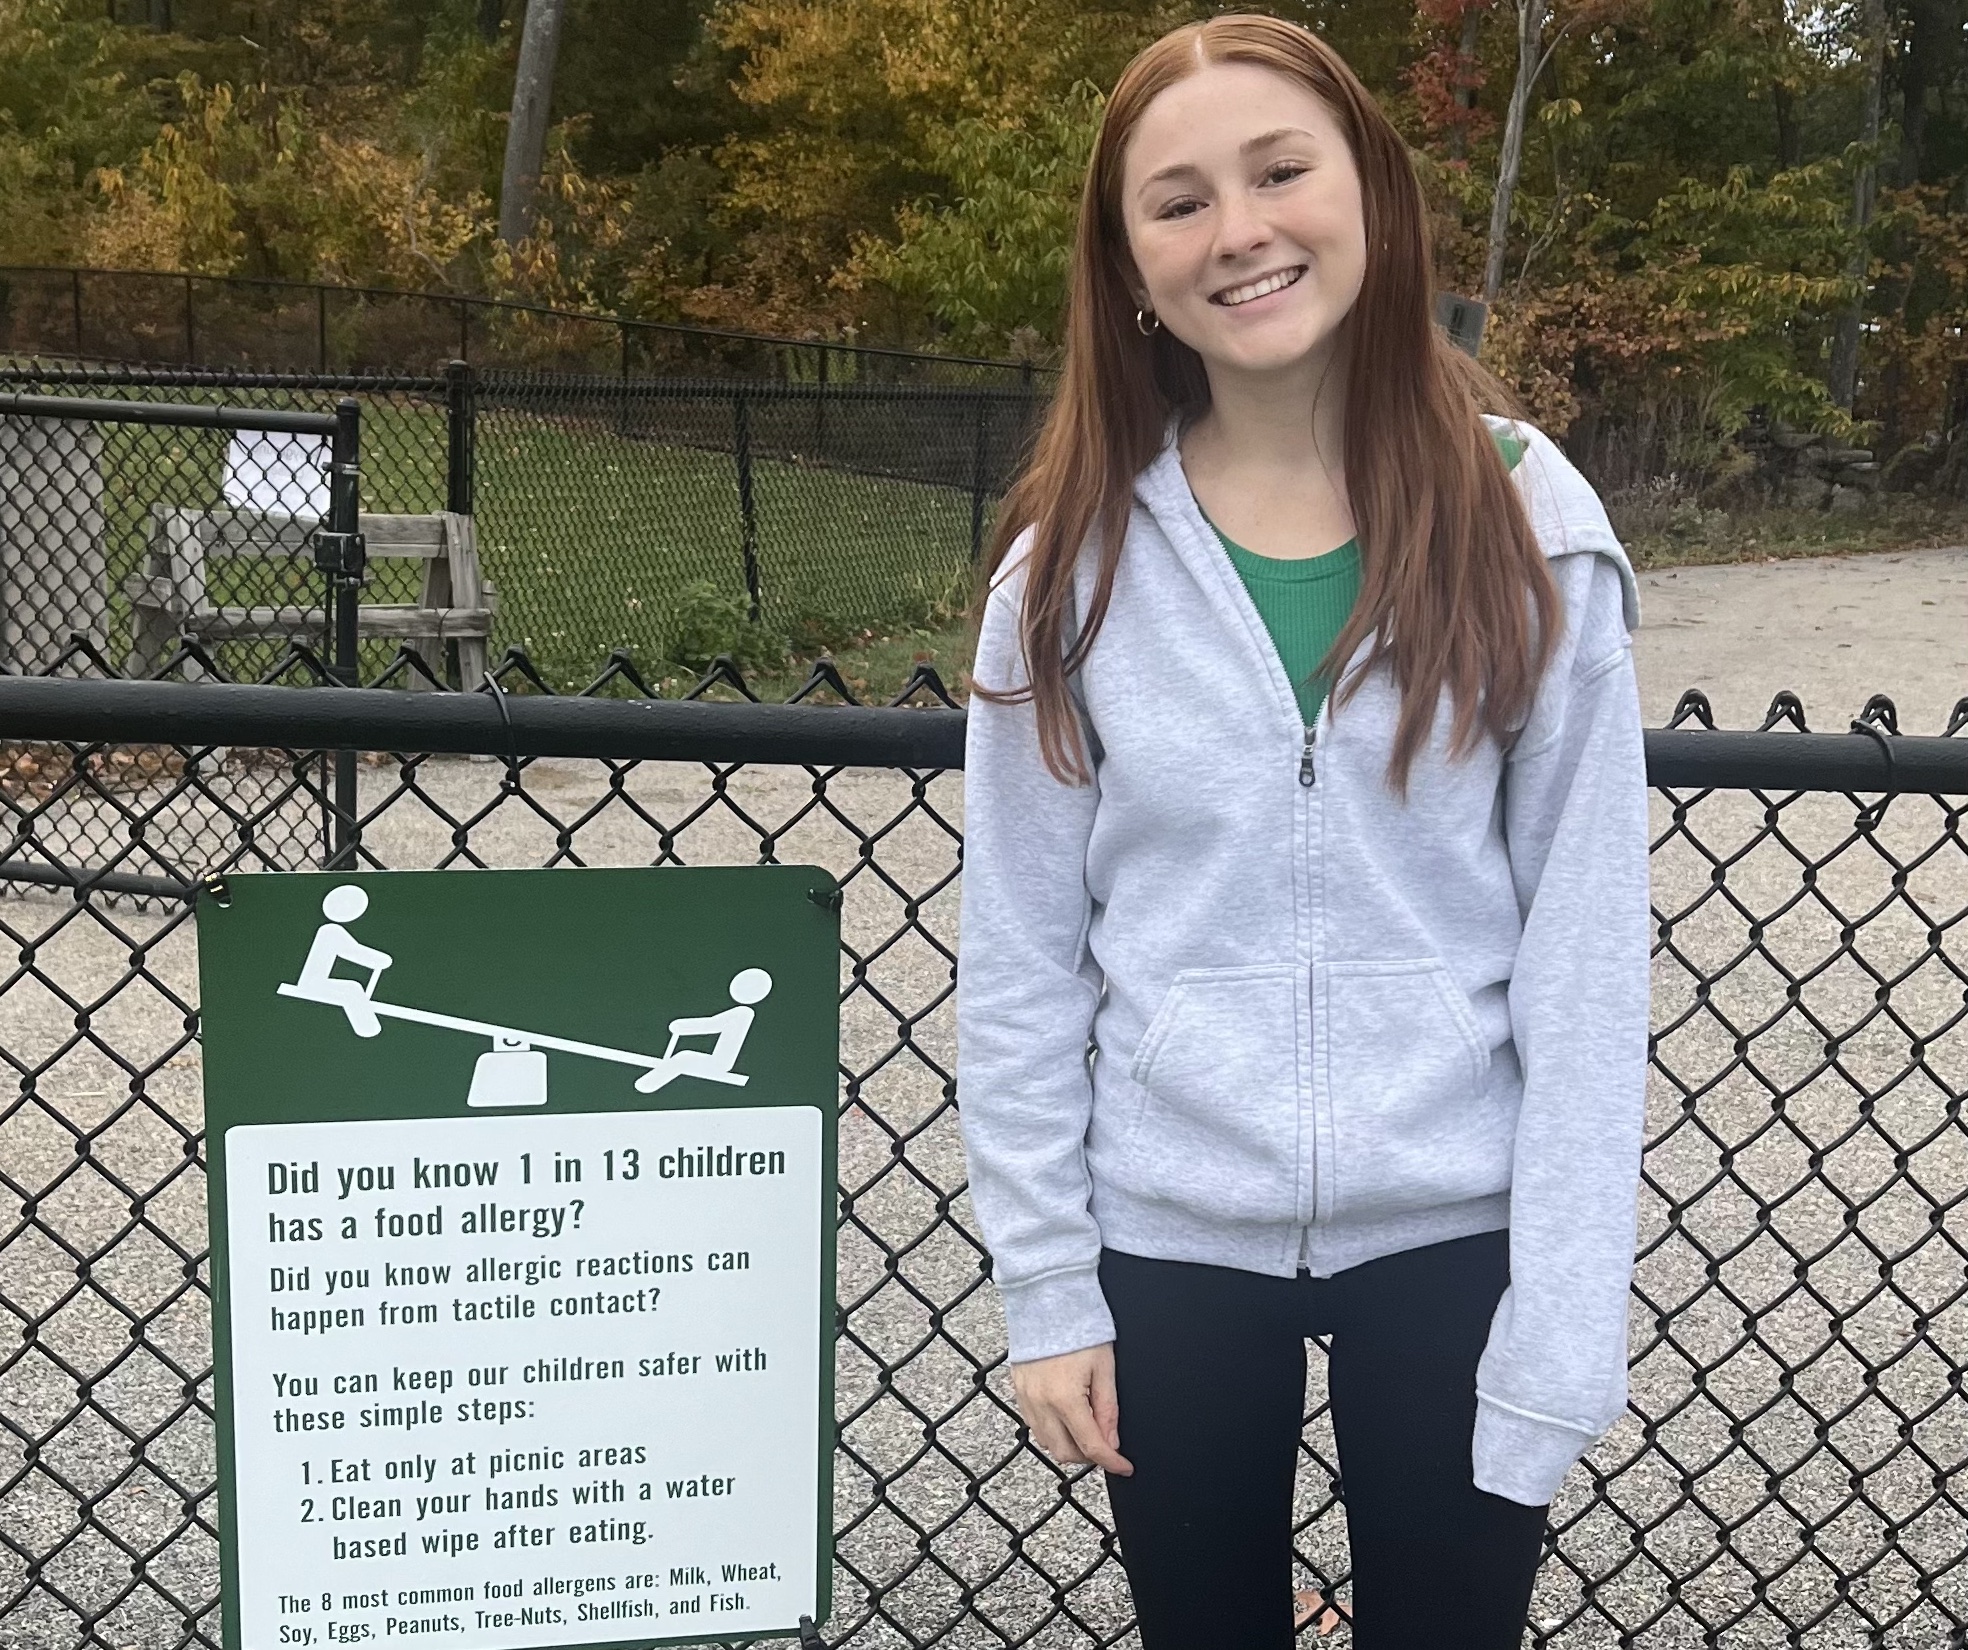 Student initiative leads to food allergen awareness campaign at school playgrounds